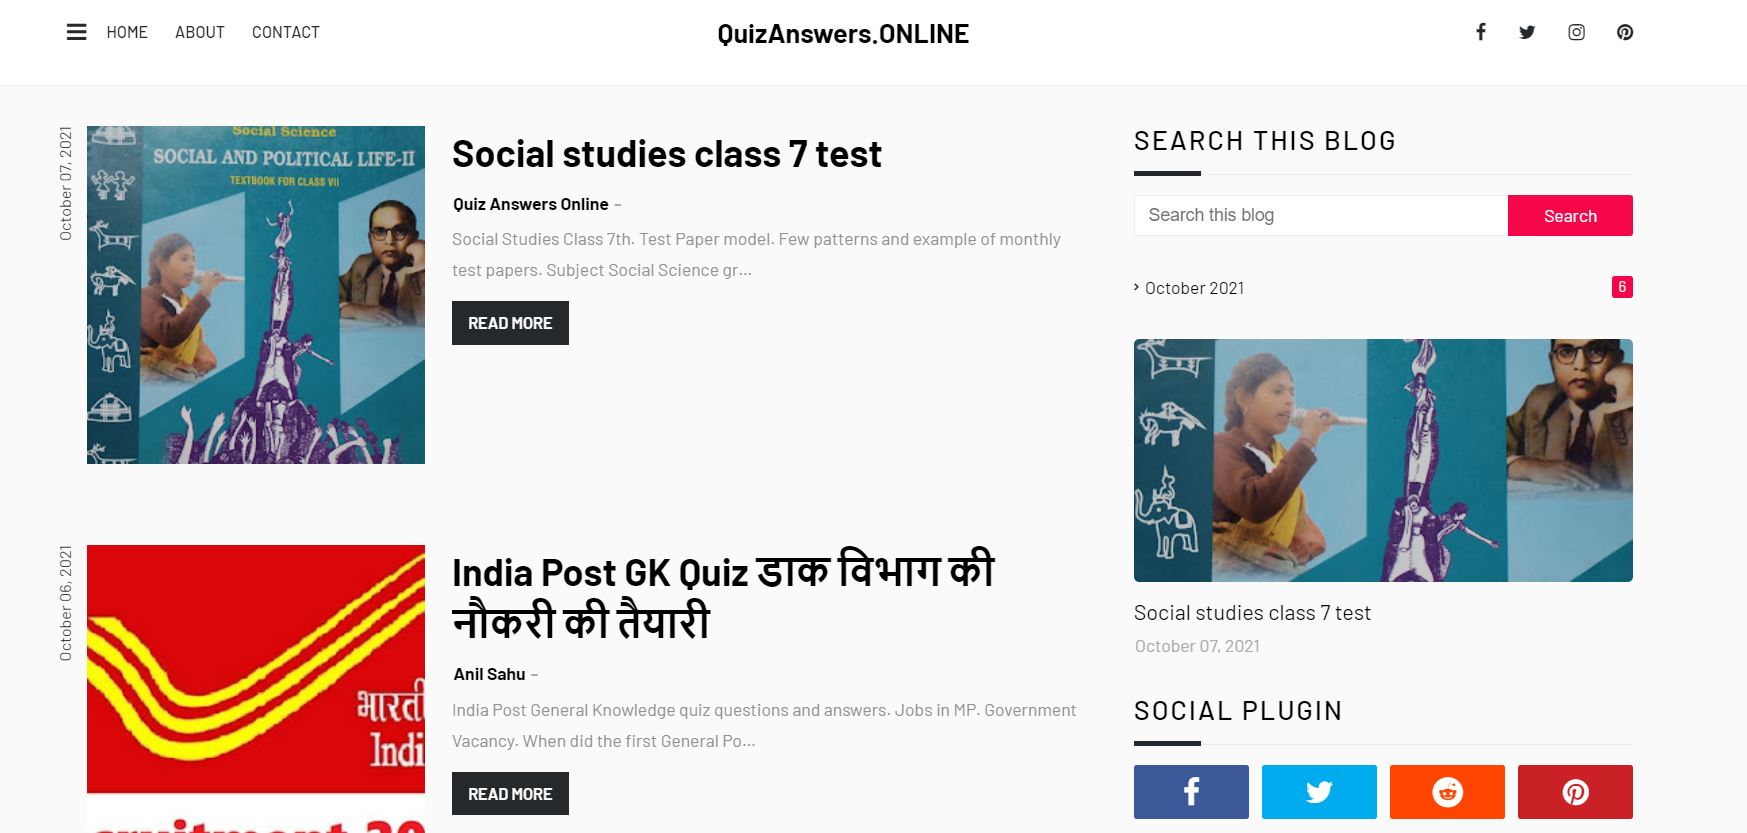 Quiz Answers Online